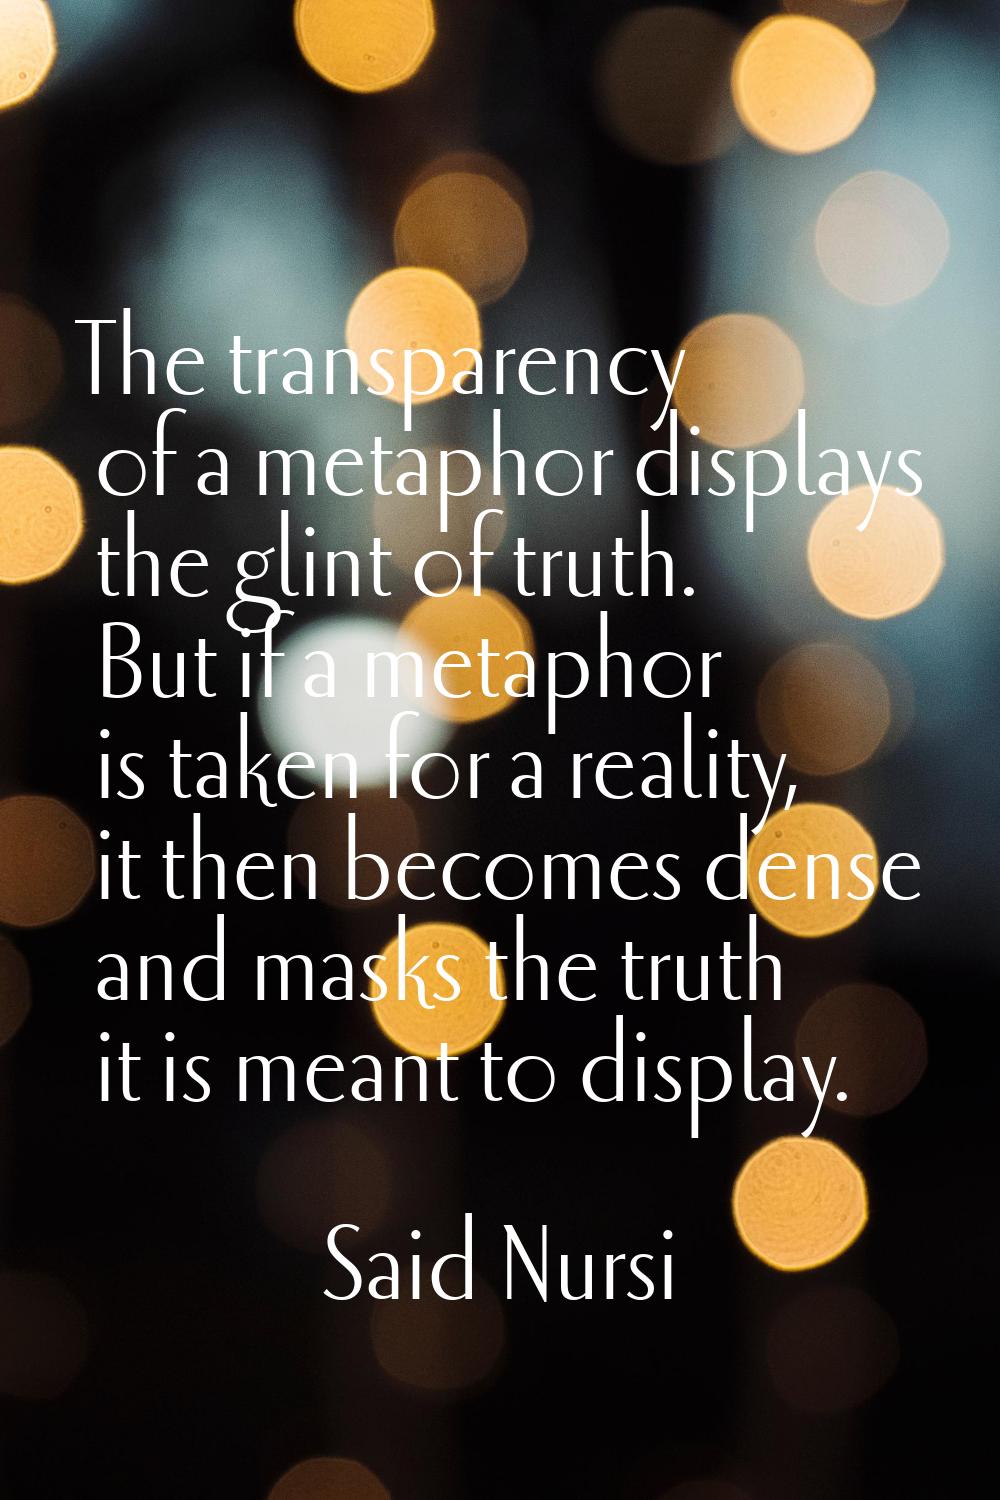 The transparency of a metaphor displays the glint of truth. But if a metaphor is taken for a realit